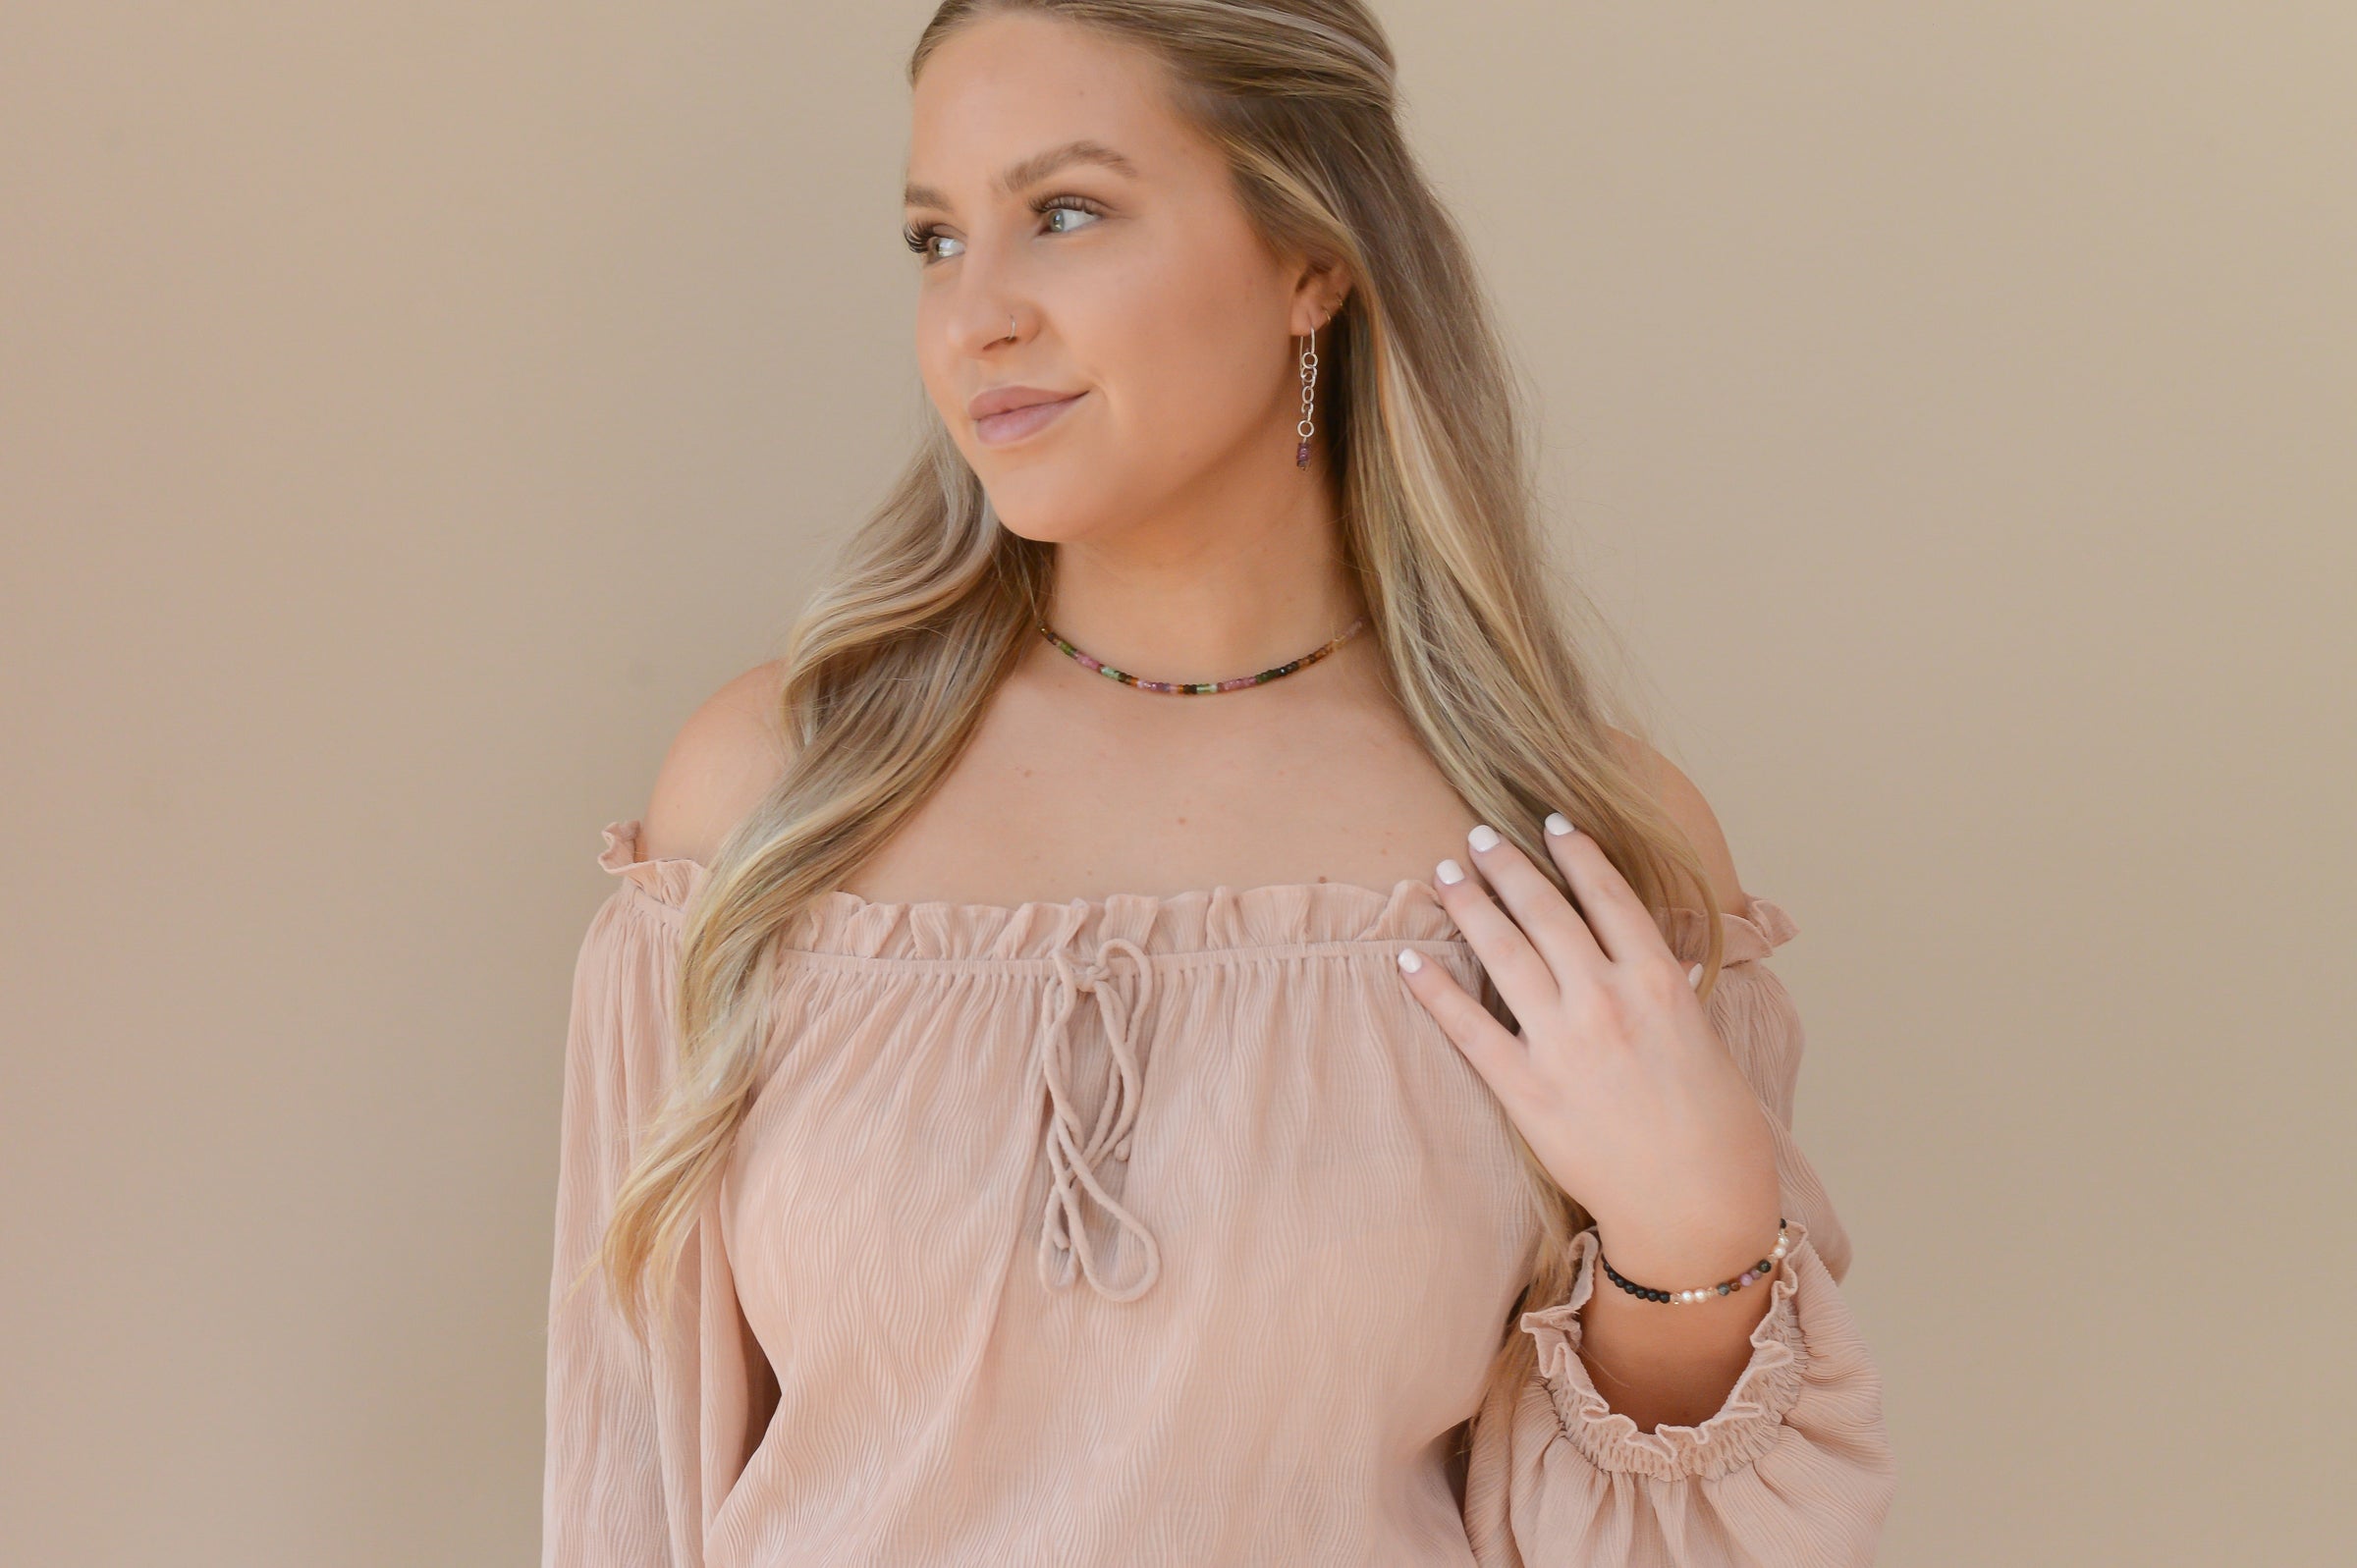 Jessica wearing the Tourmaline Sparkle Choker and Pink Tourmaline and sterling silver dangle earrings. Complete the look with a tourmaline and pearl bracelet.